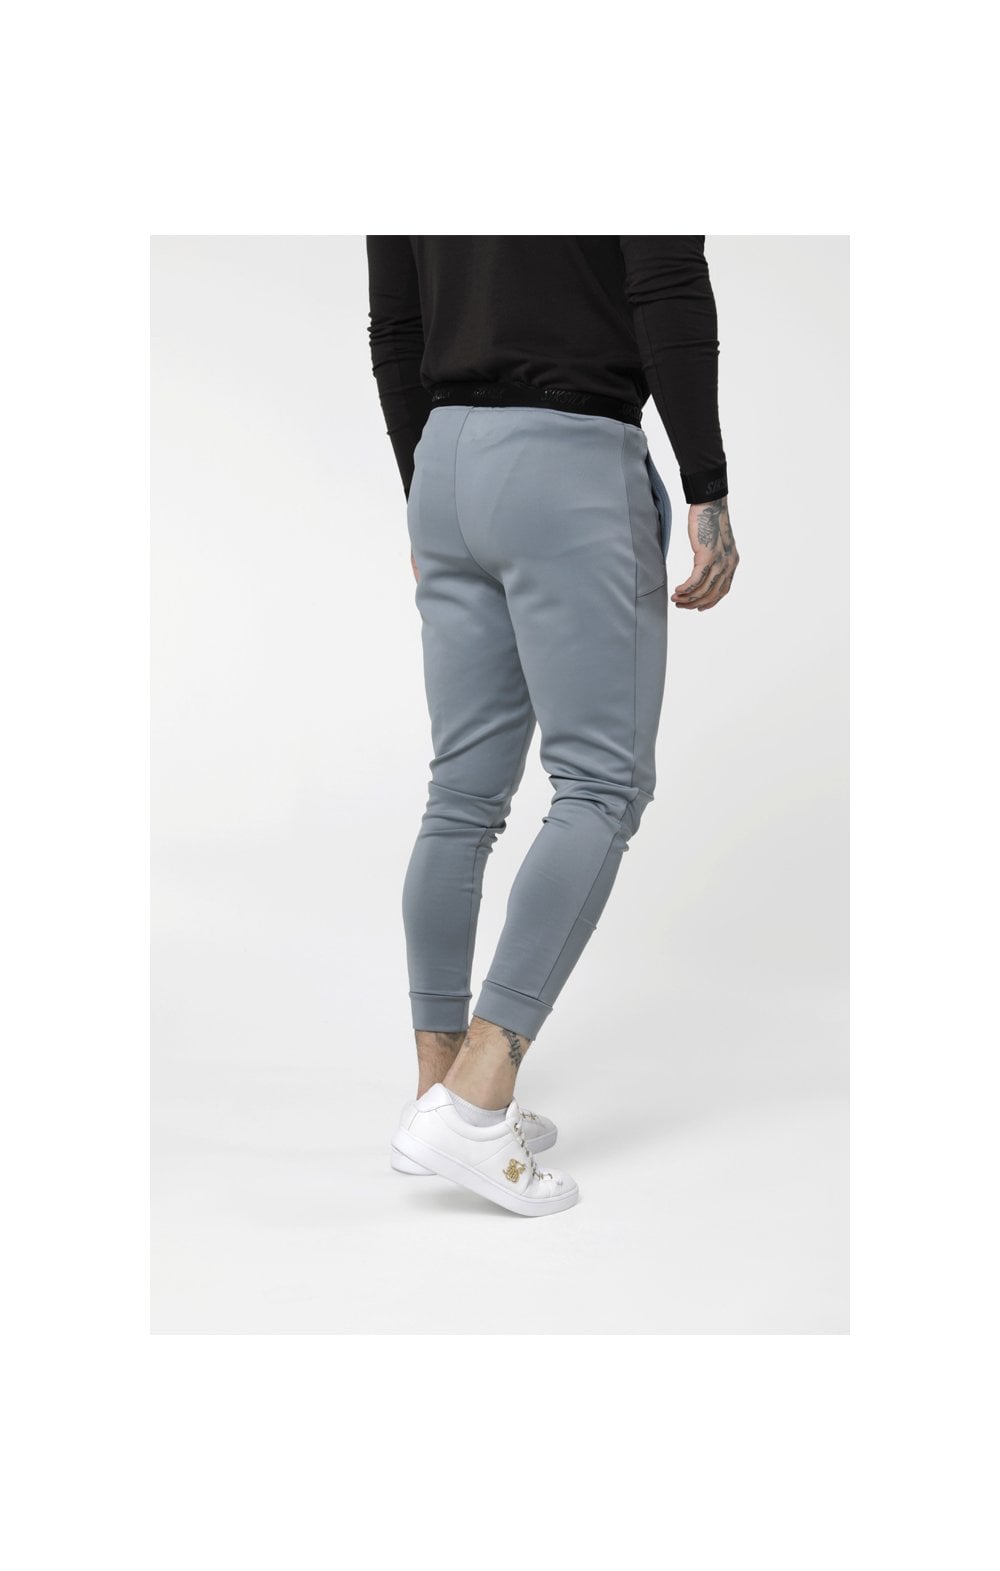 Load image into Gallery viewer, SikSilk Agility Track Pants - Ice Grey (5)